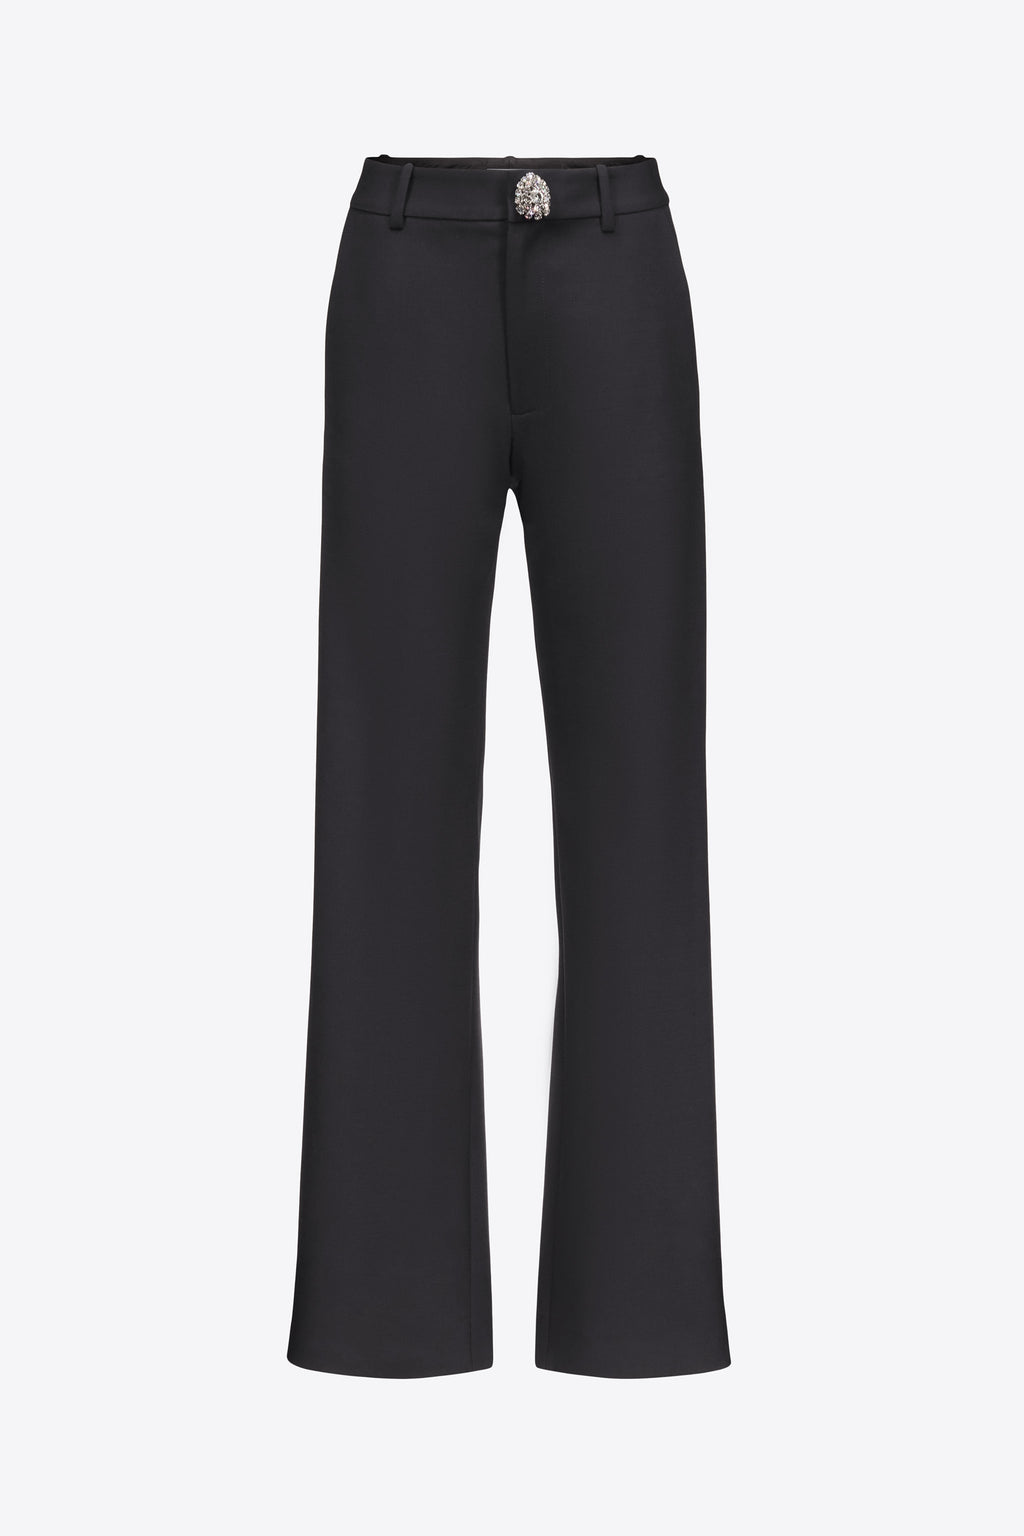 Crystal Button Slit Trouser